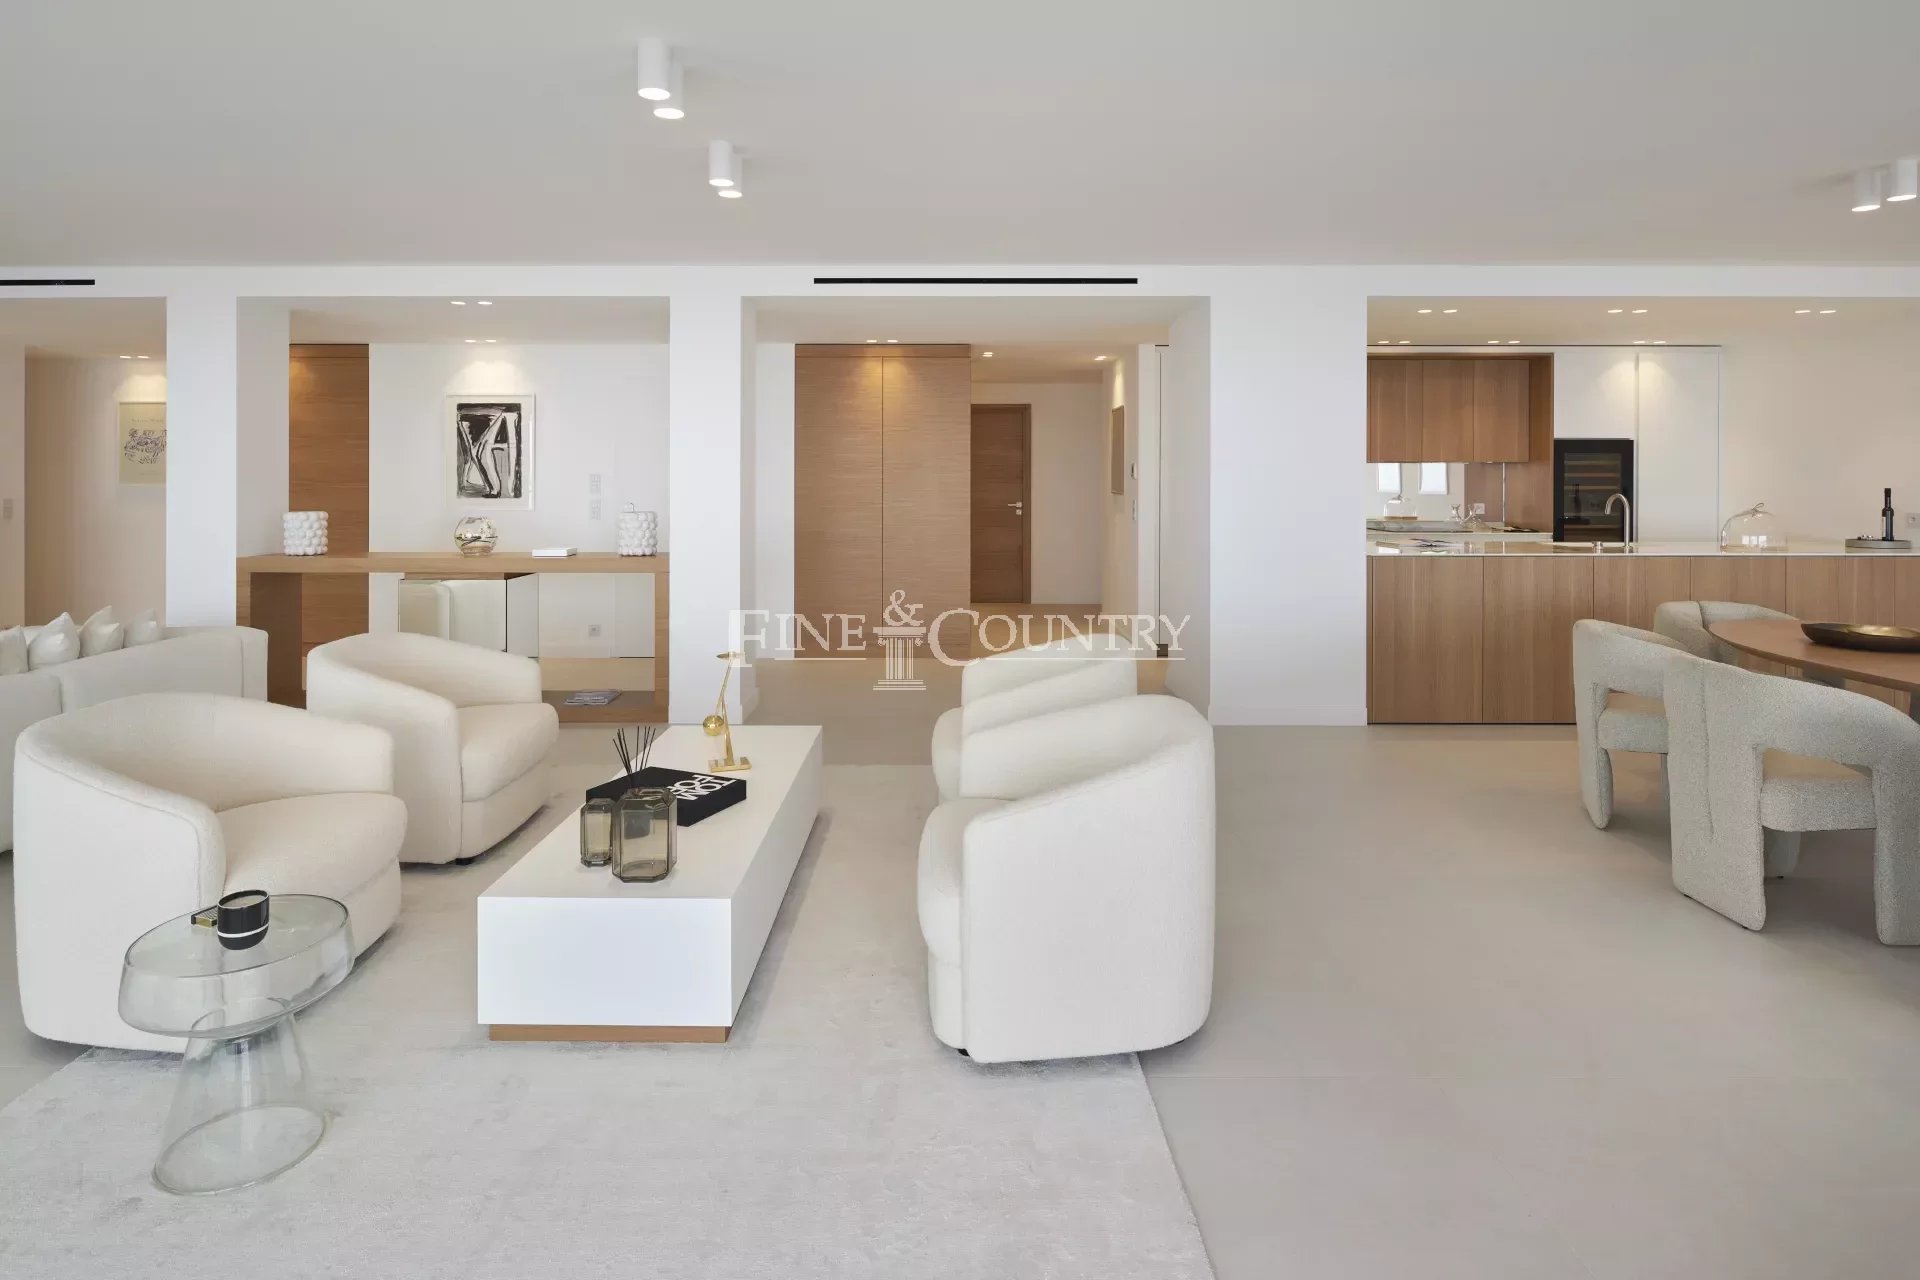 Luxury Apartment for sale in Cannes, with sea views